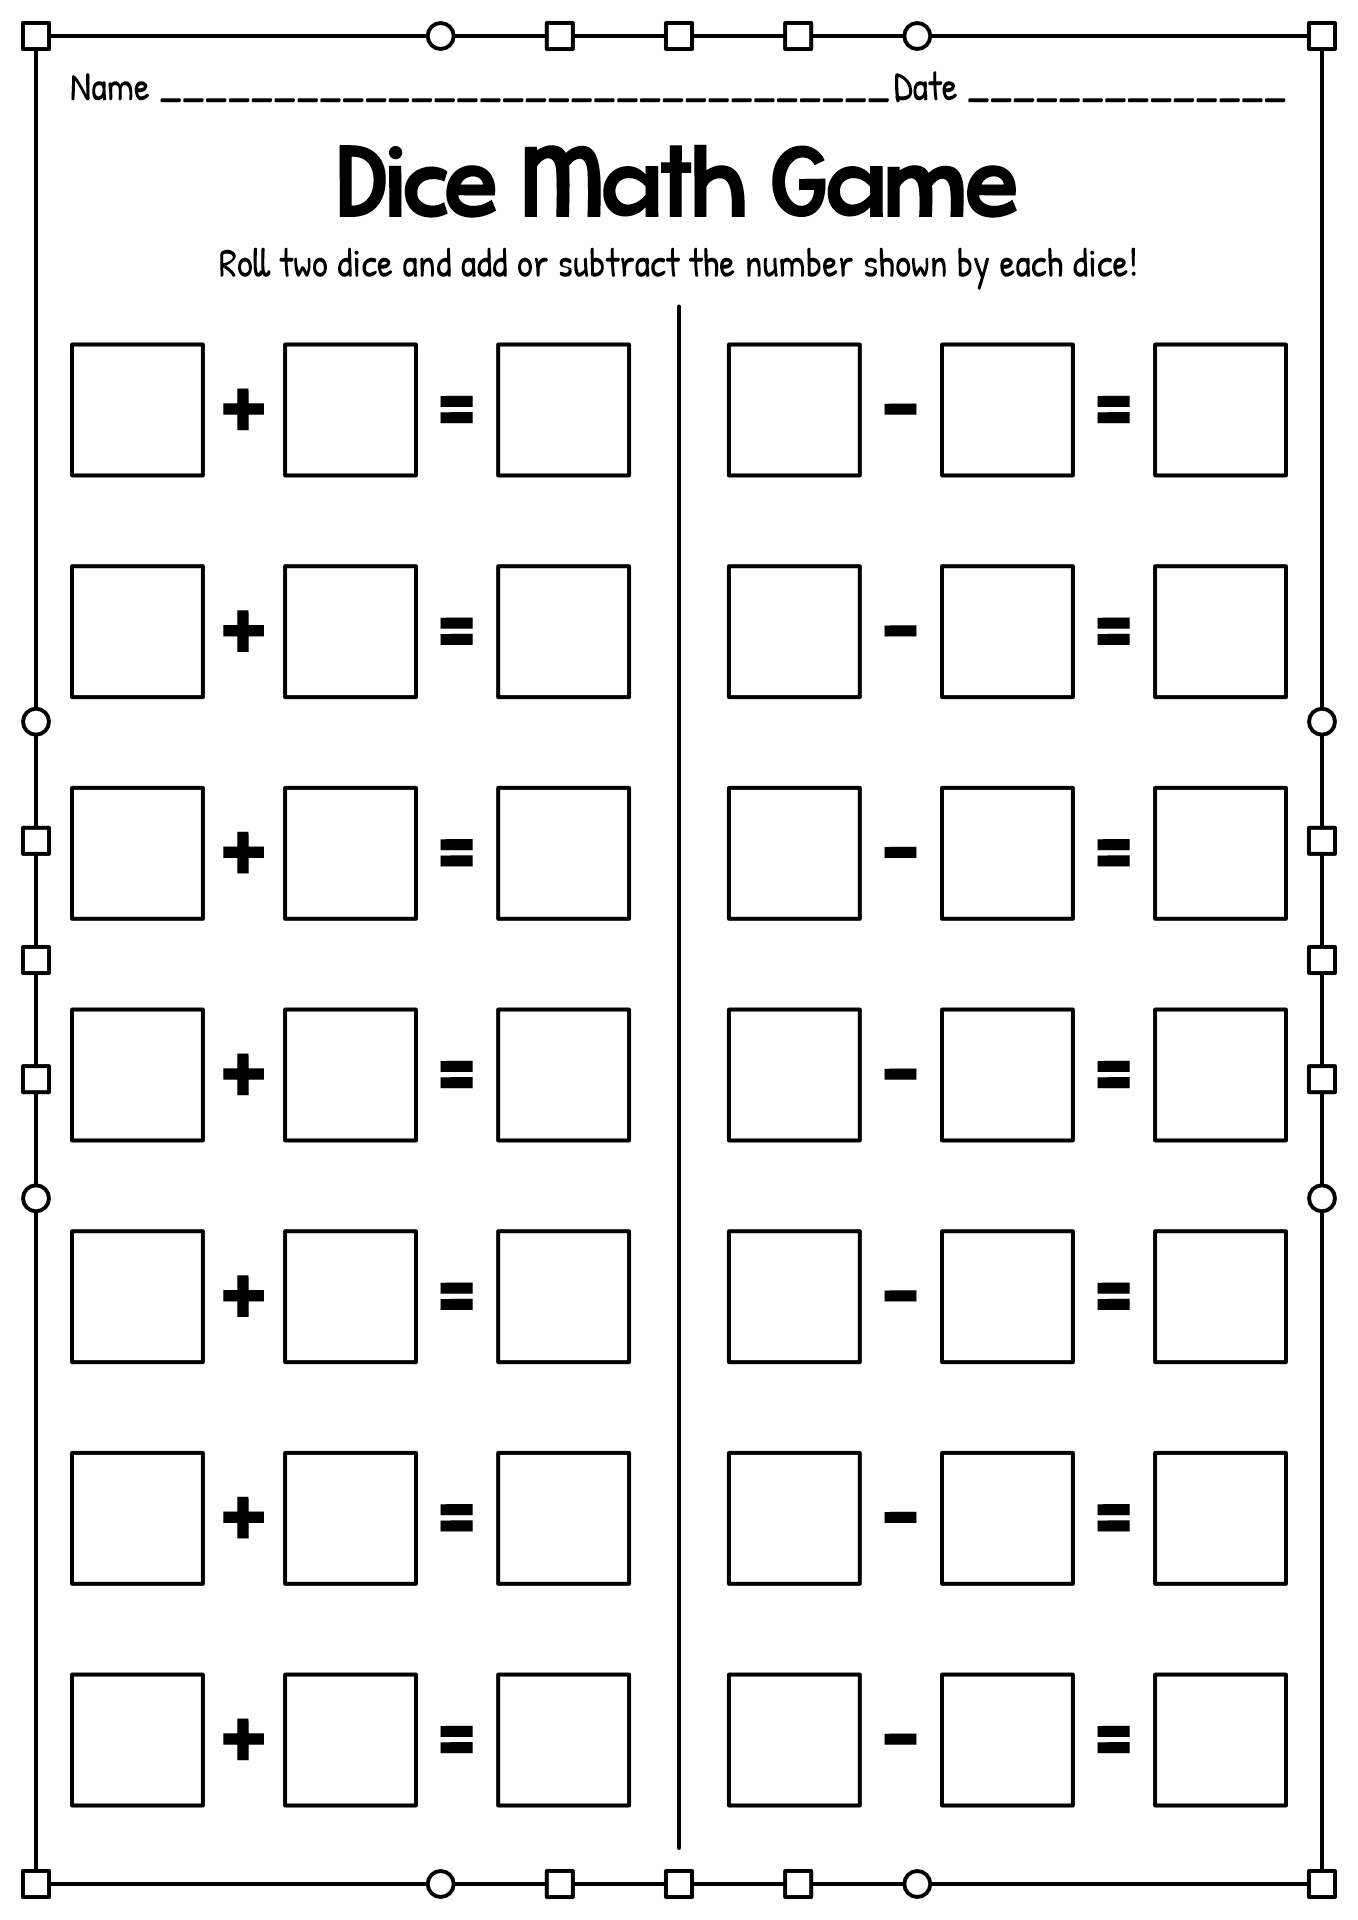 Addition and Subtraction Dice Game Sheet